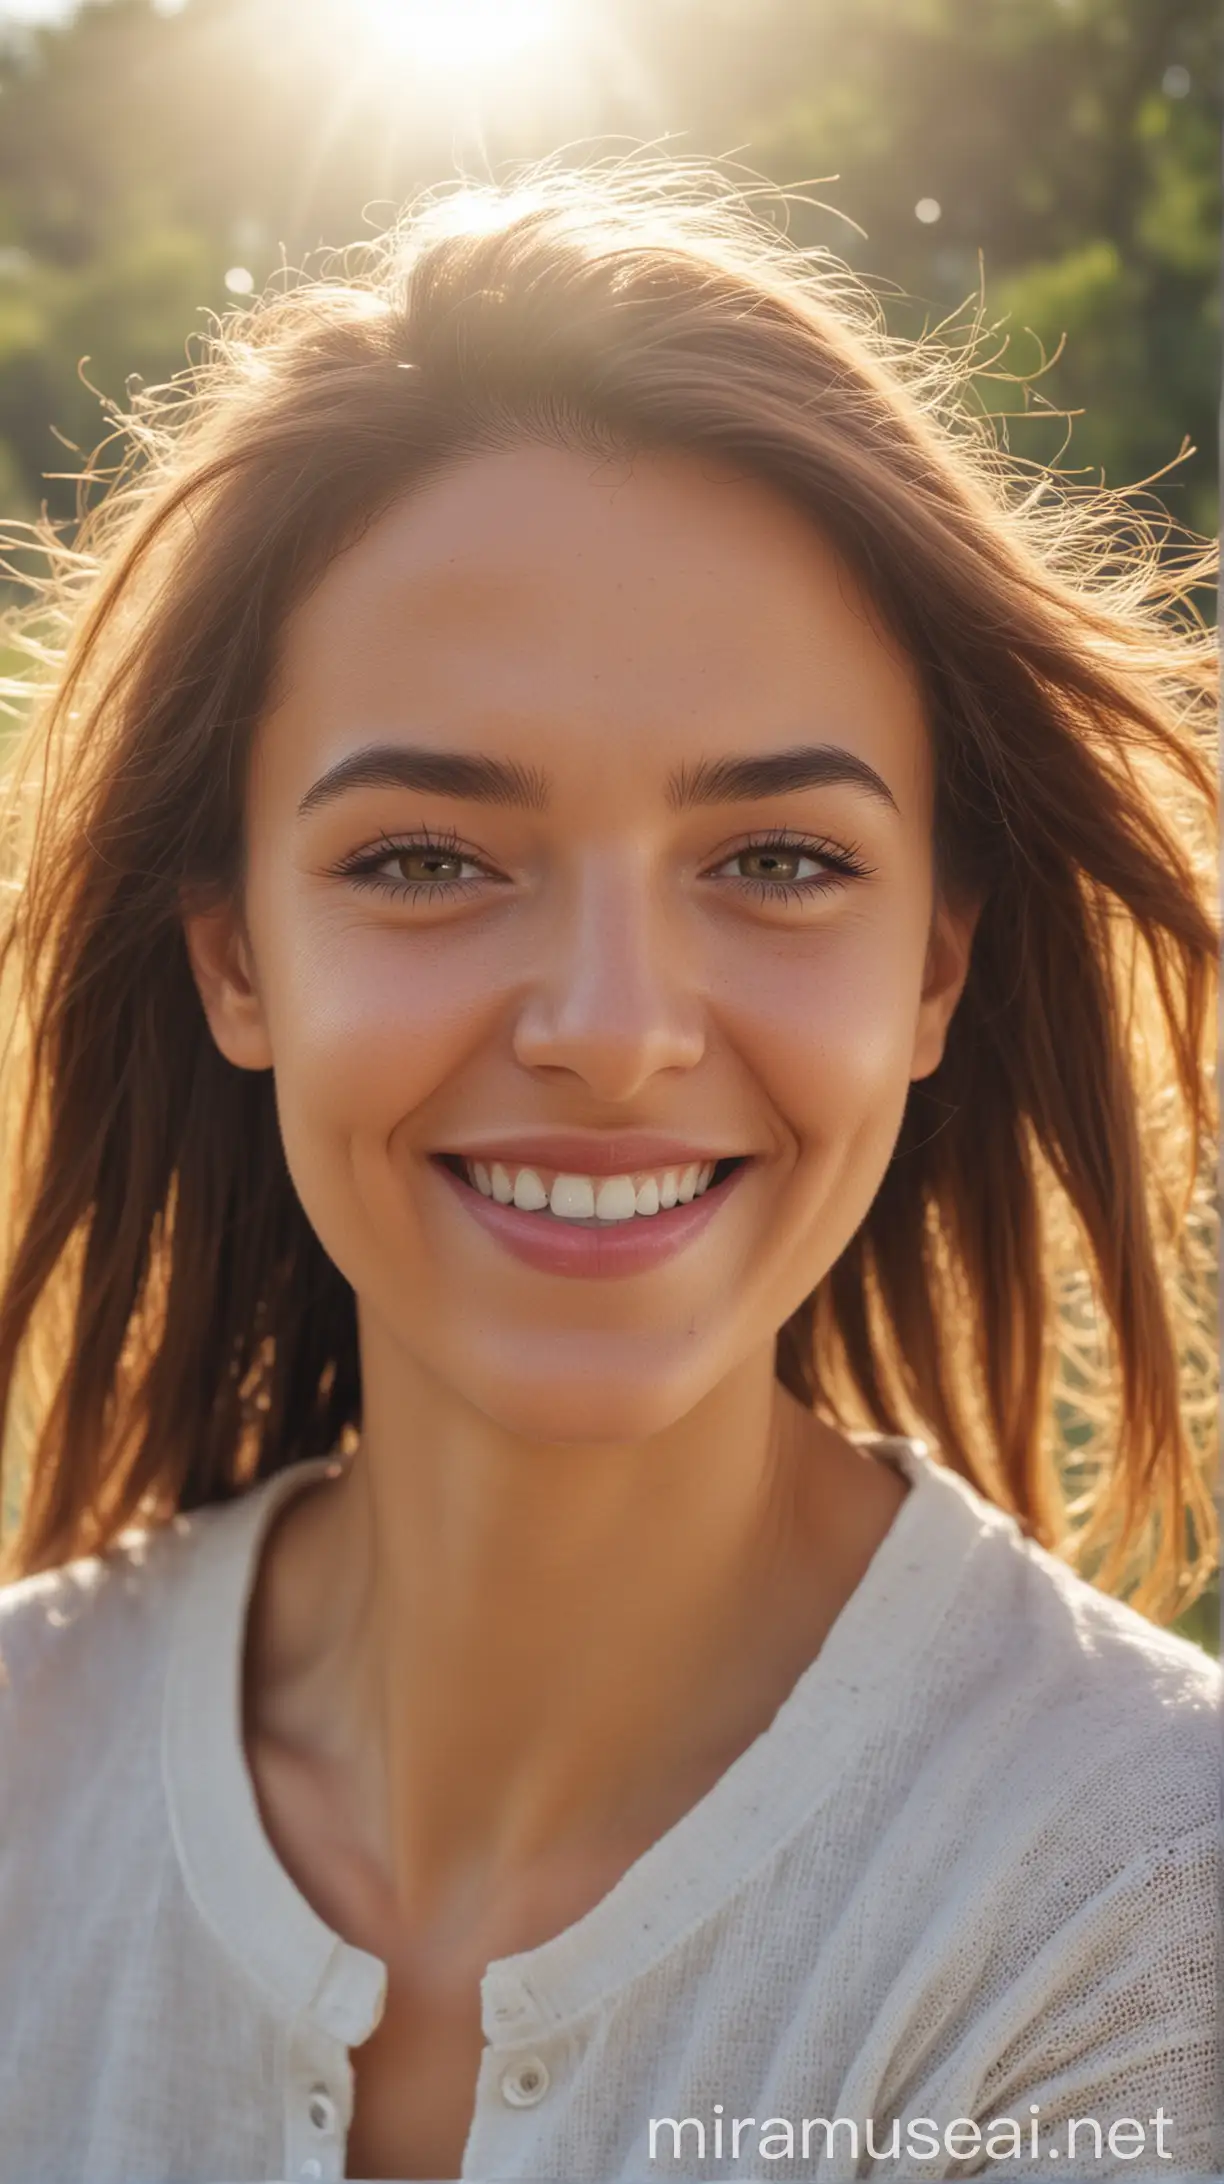 smile women, natural background, sun light effect, 4k, HDR, morning time weather